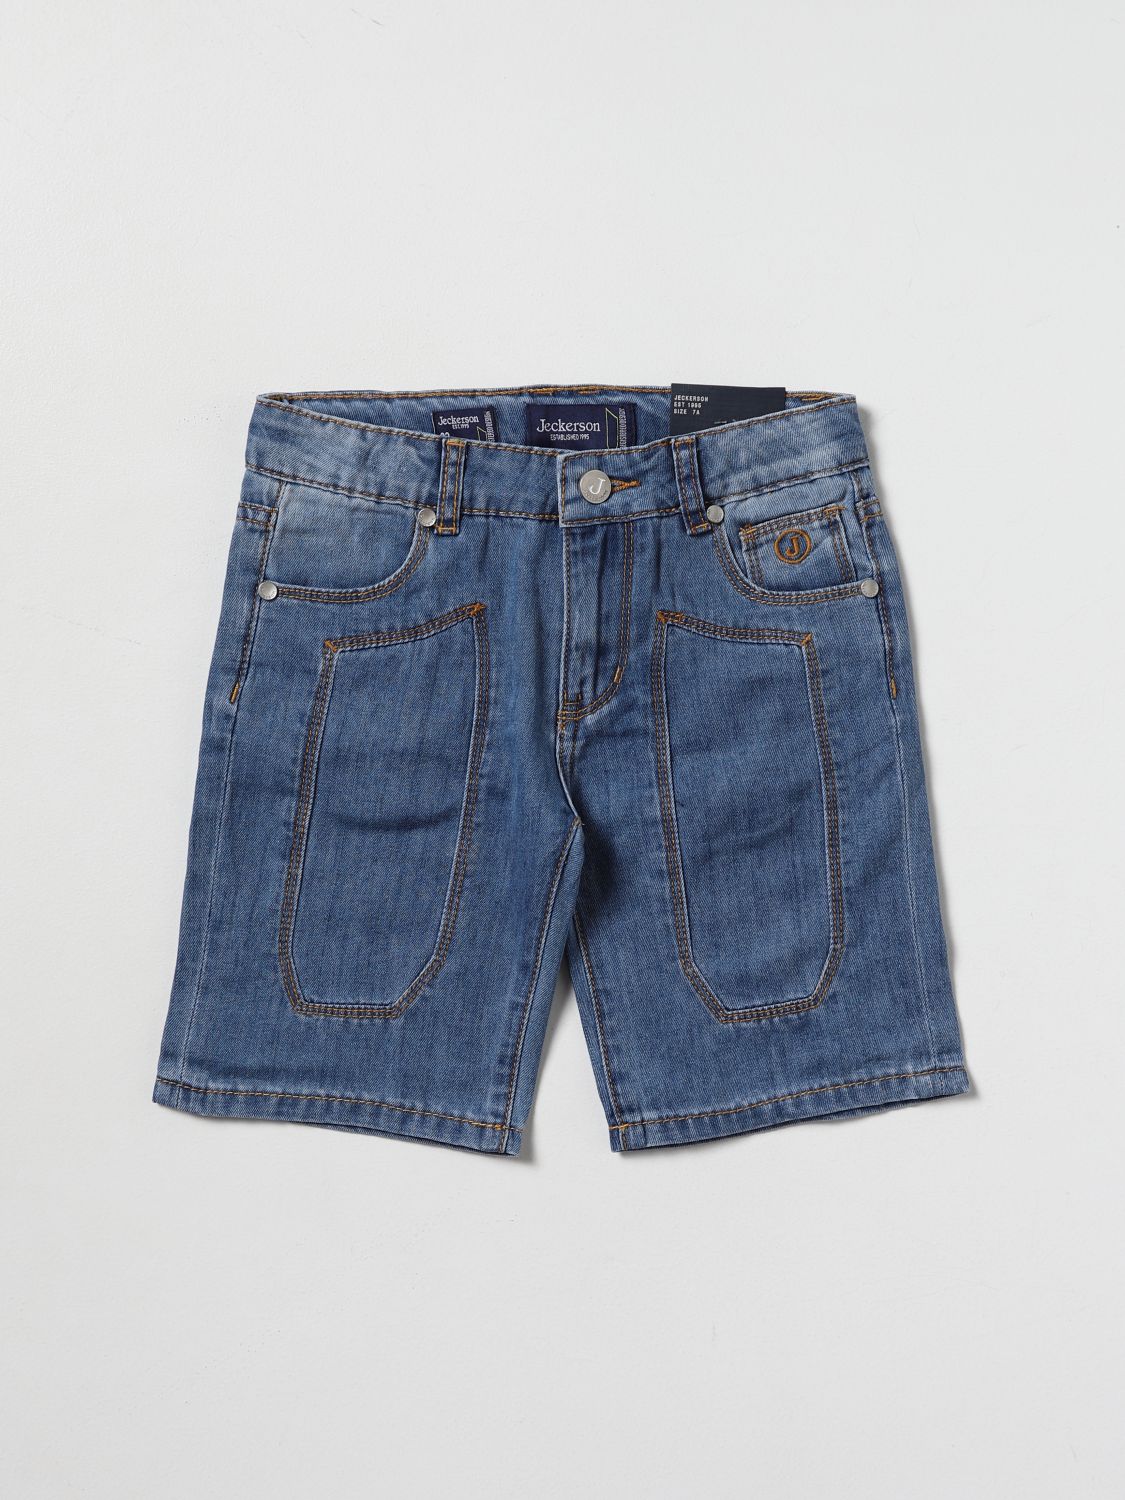 Shorts Jeckerson: Jeckerson shorts for boy stone washed 1